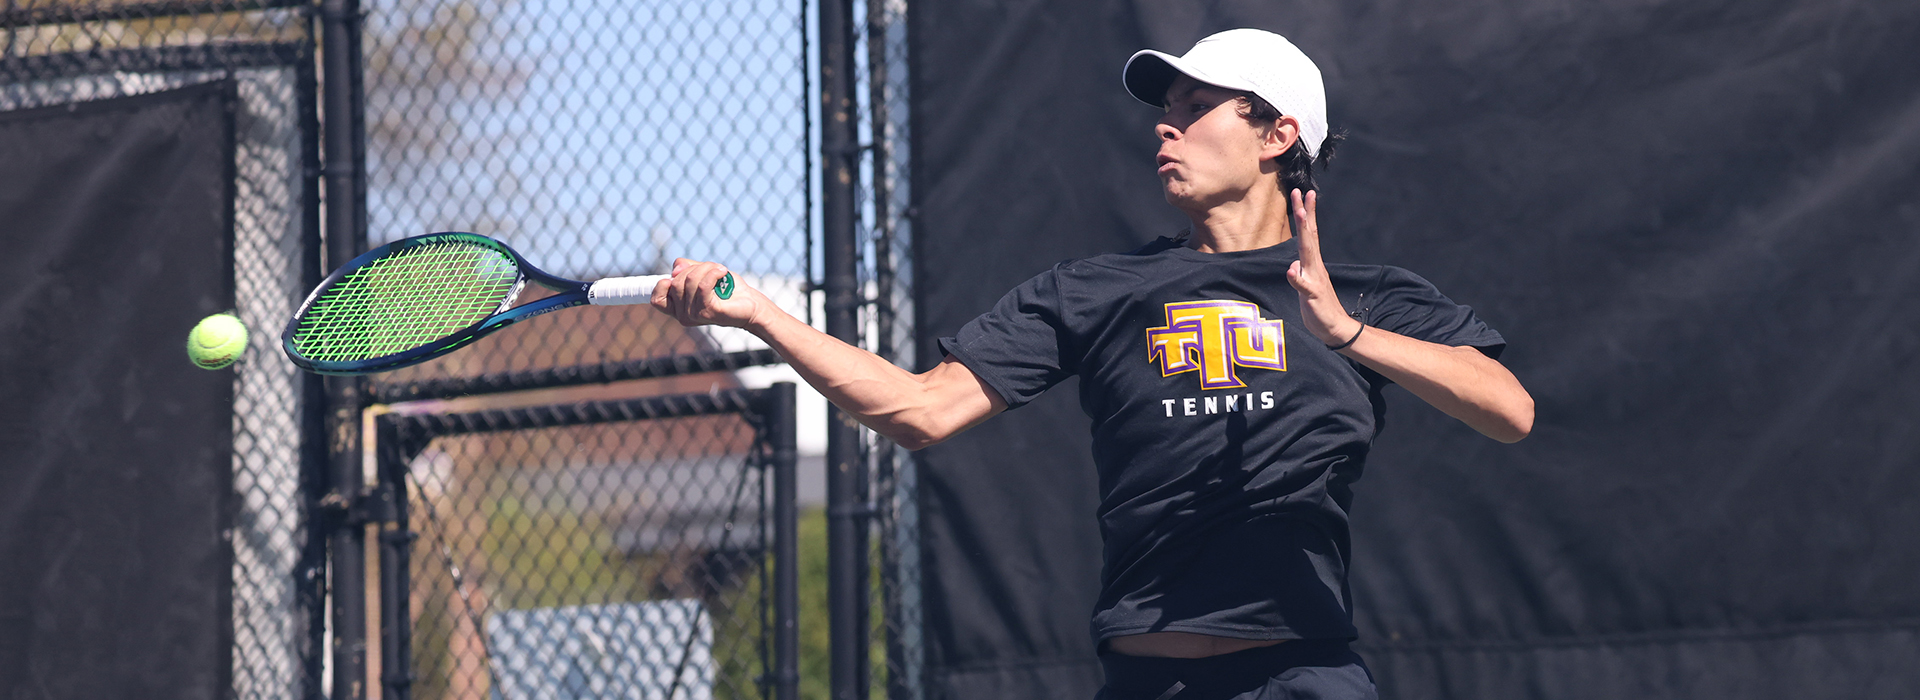 Tech tennis continues four-match homestand with Wednesday meeting against New Mexico State